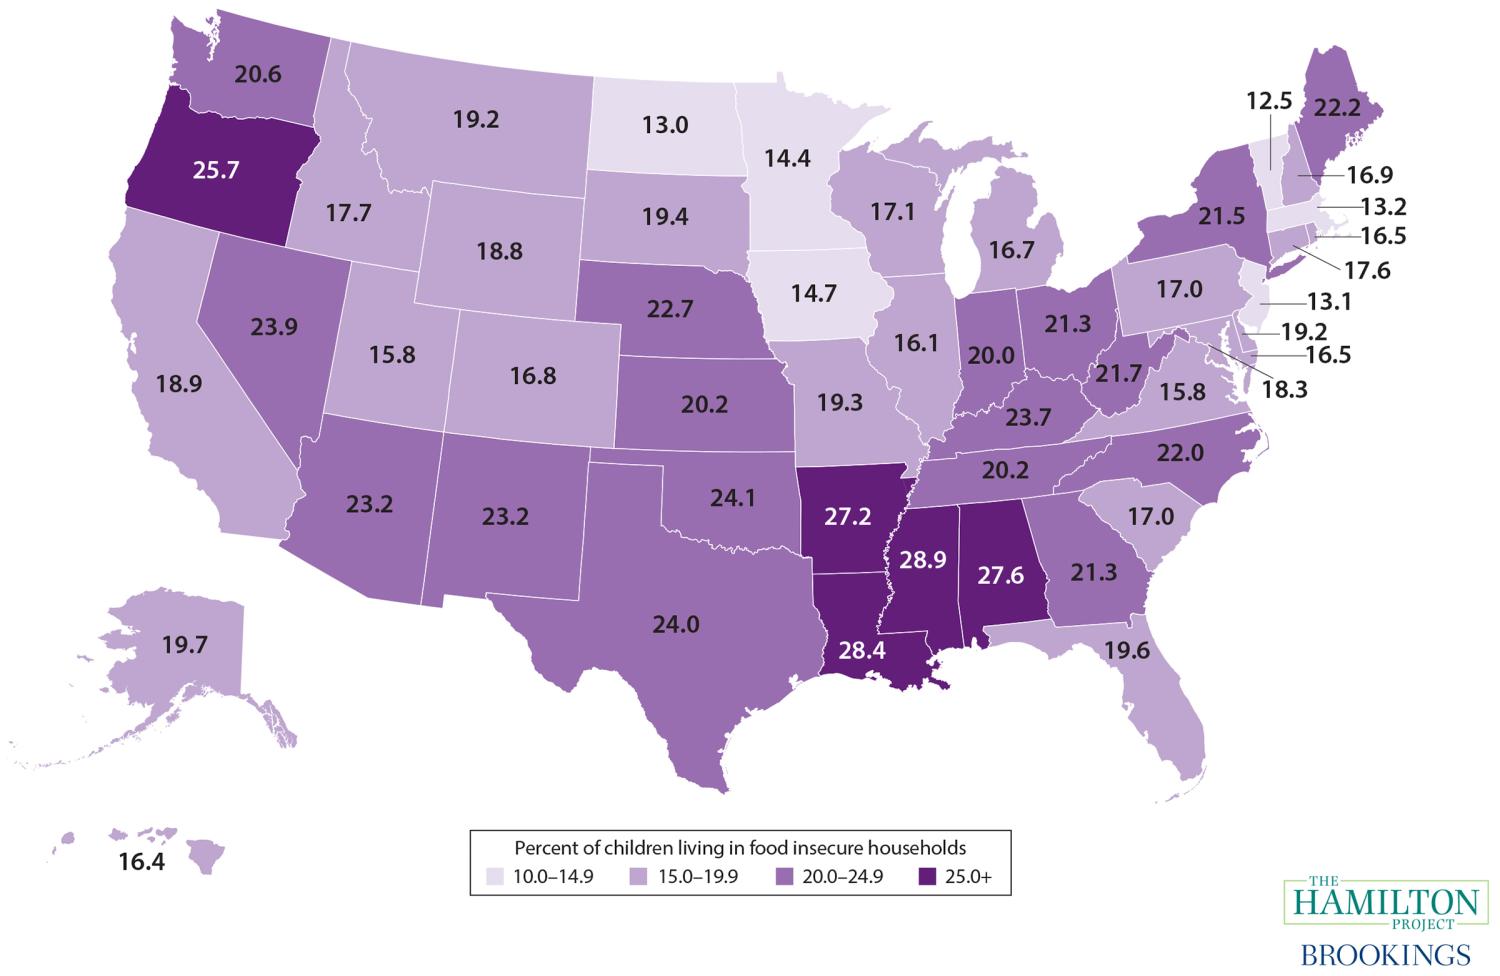 Map: Percentage of children living in food-insecure households, by state